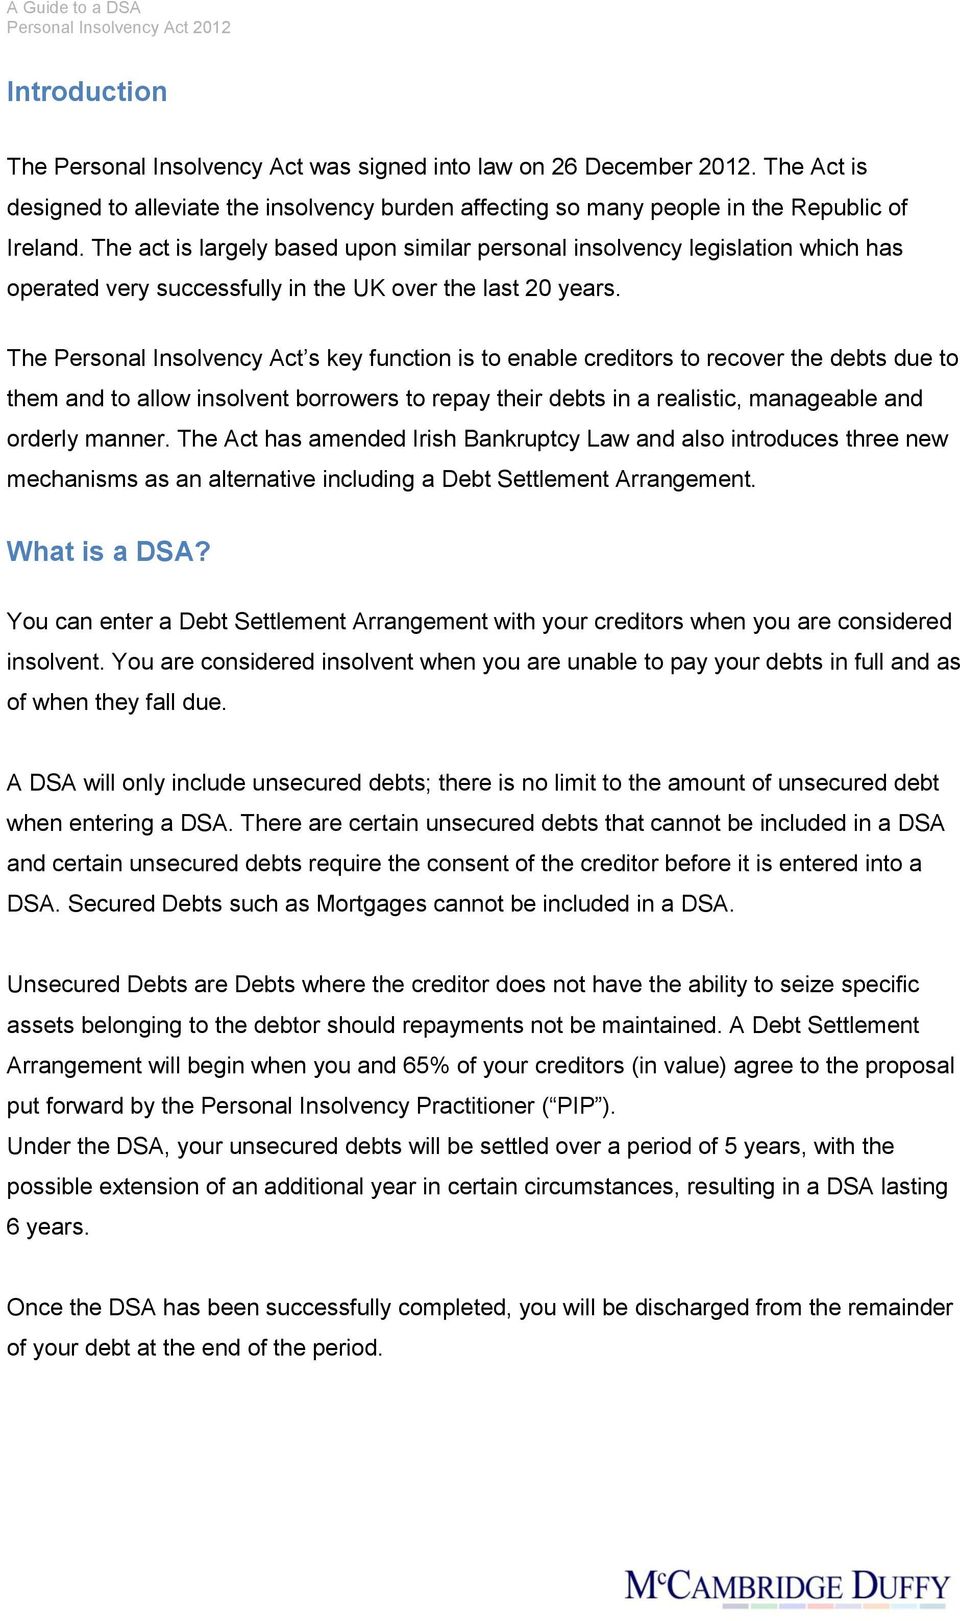 The Personal Insolvency Act s key function is to enable creditors to recover the debts due to them and to allow insolvent borrowers to repay their debts in a realistic, manageable and orderly manner.